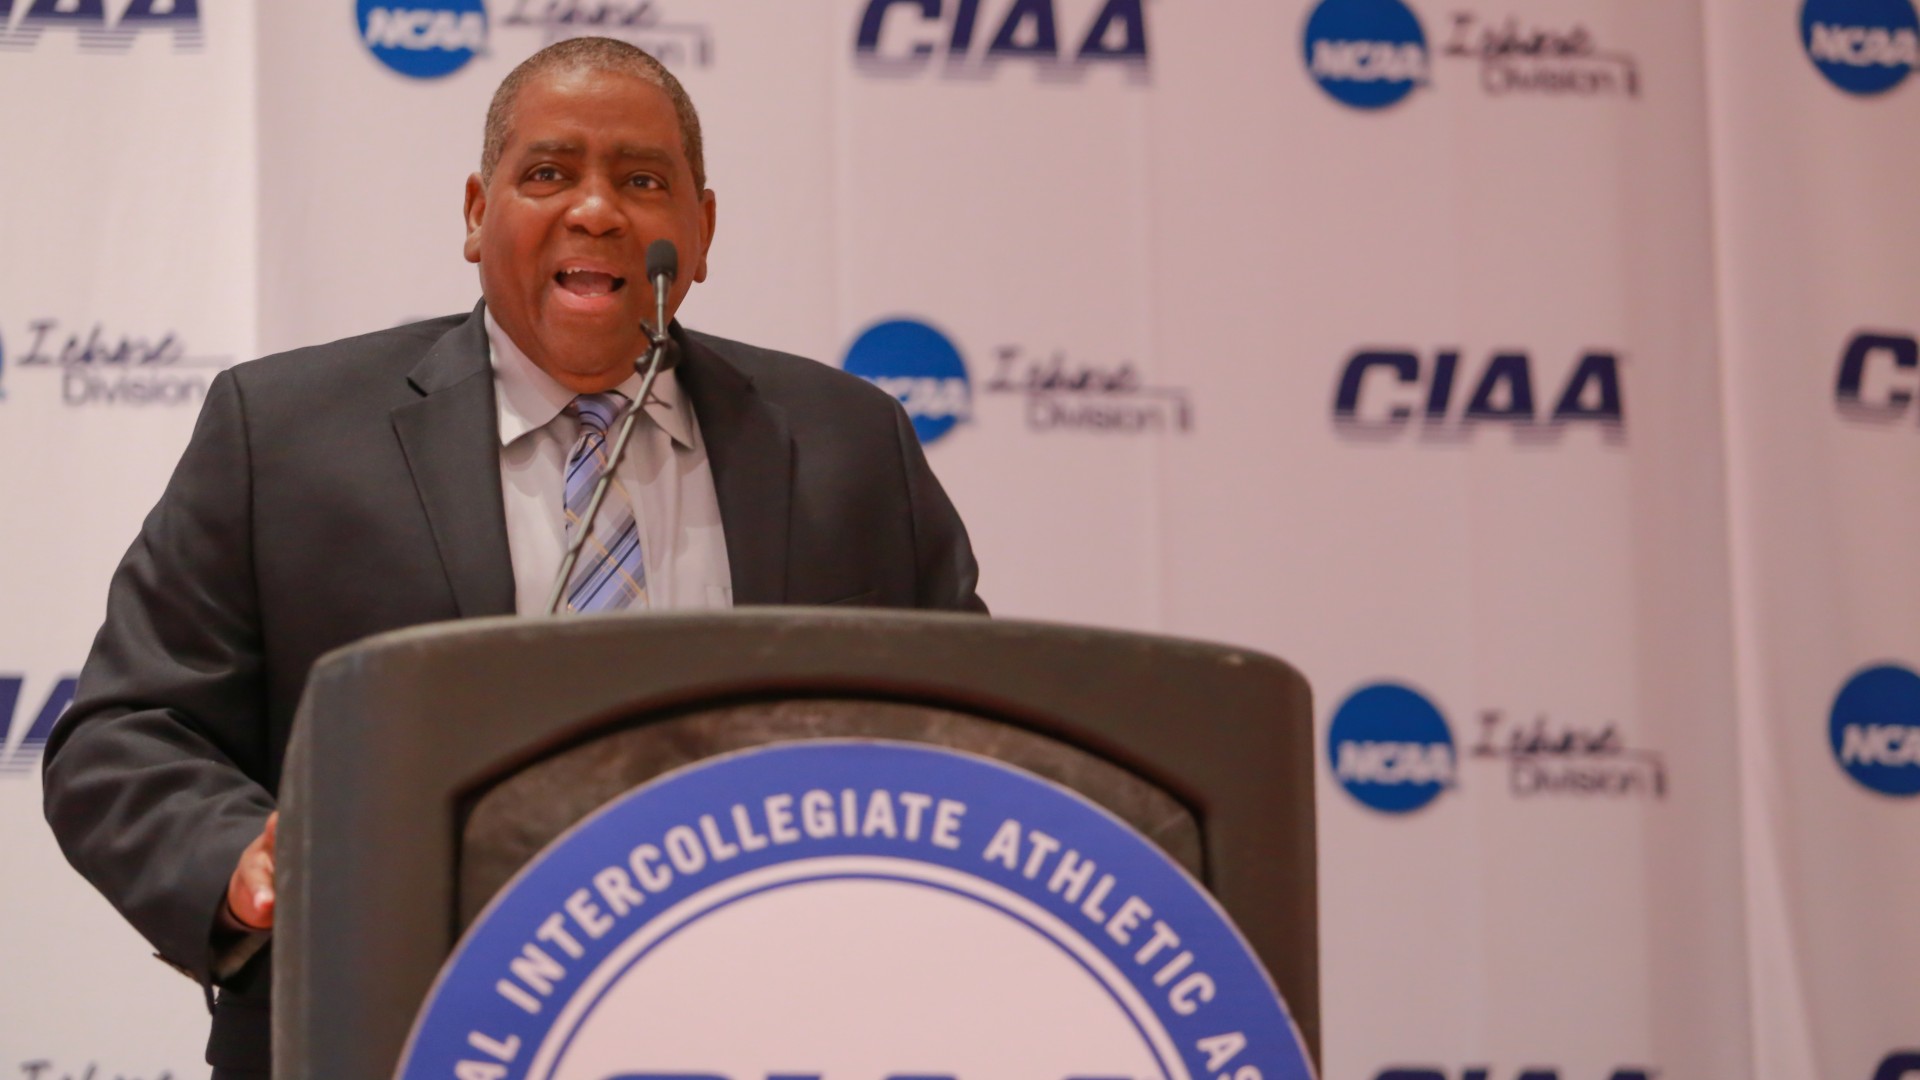 Steve Joyner Sr. speaking at his CIAA Hall of Fame Induction Ceremony